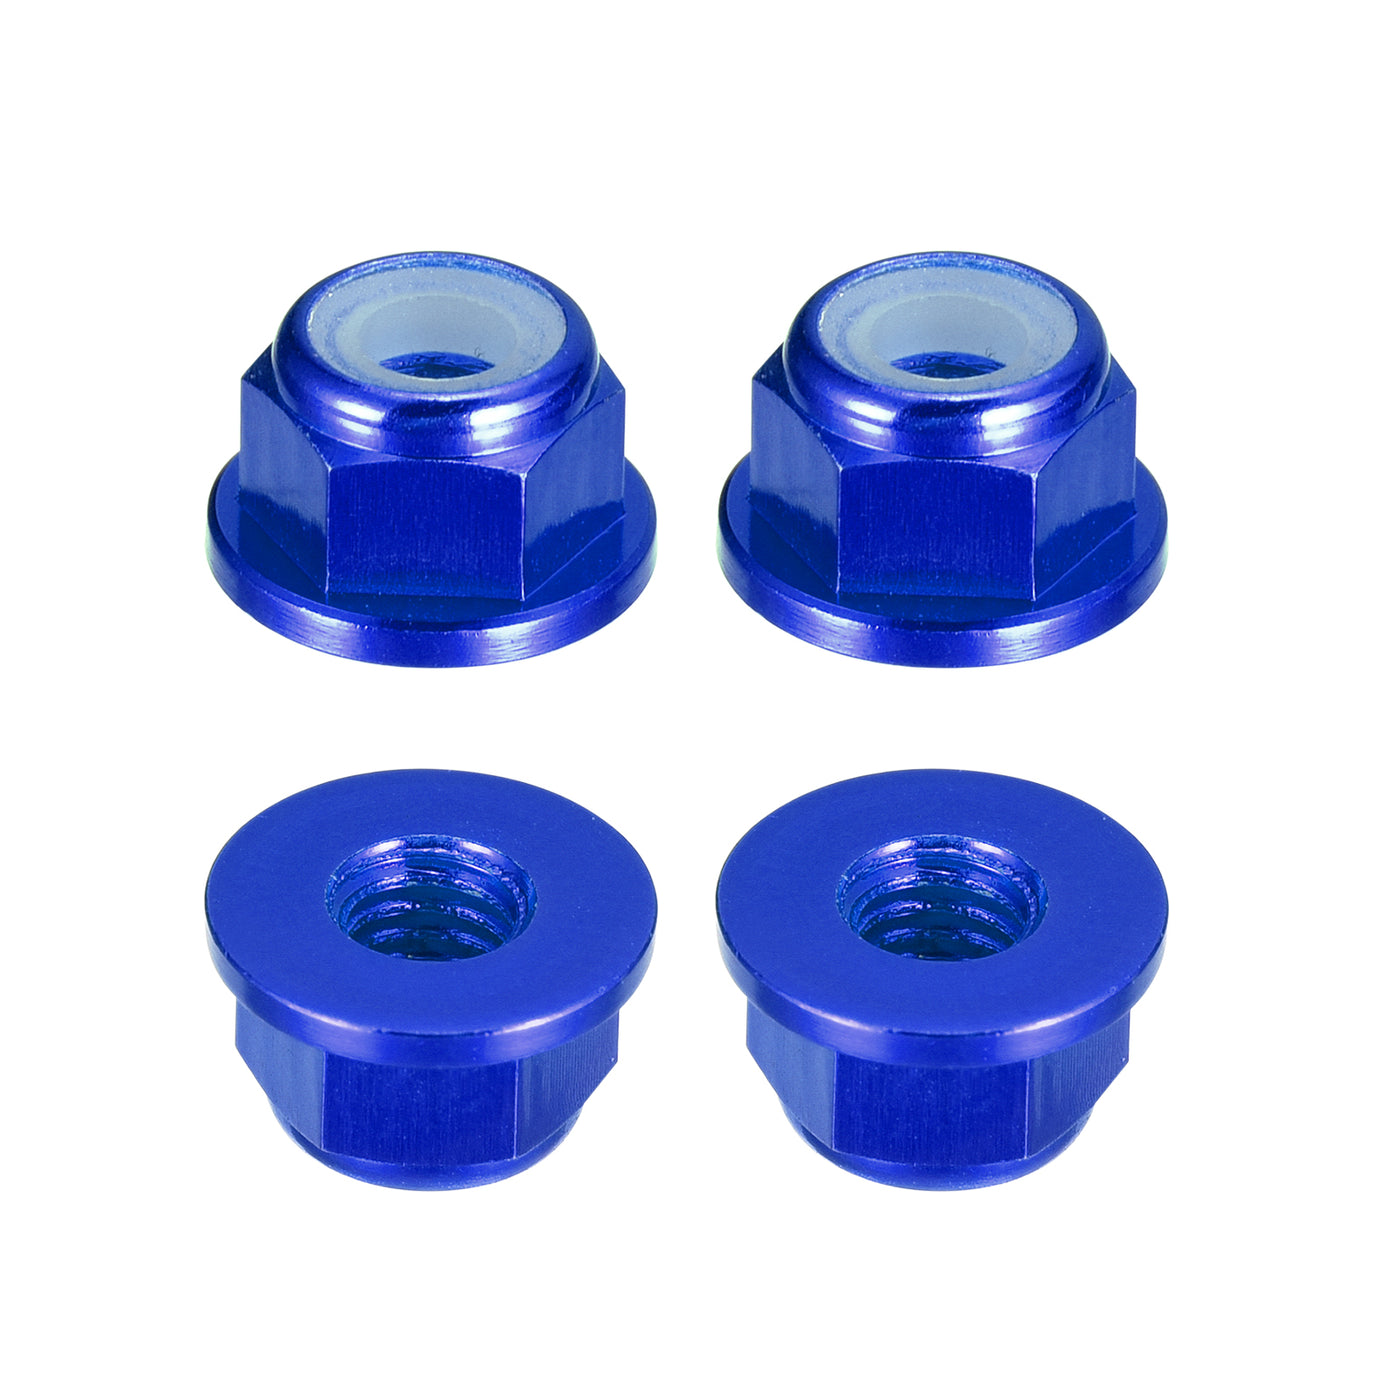 uxcell Uxcell Nylon Insert Hex Lock Nuts, 4pcs - M4 x 0.7mm Aluminum Alloy Self-Locking Nut, Anodizing Flange Lock Nut for Fasteners (Sapphire Blue)